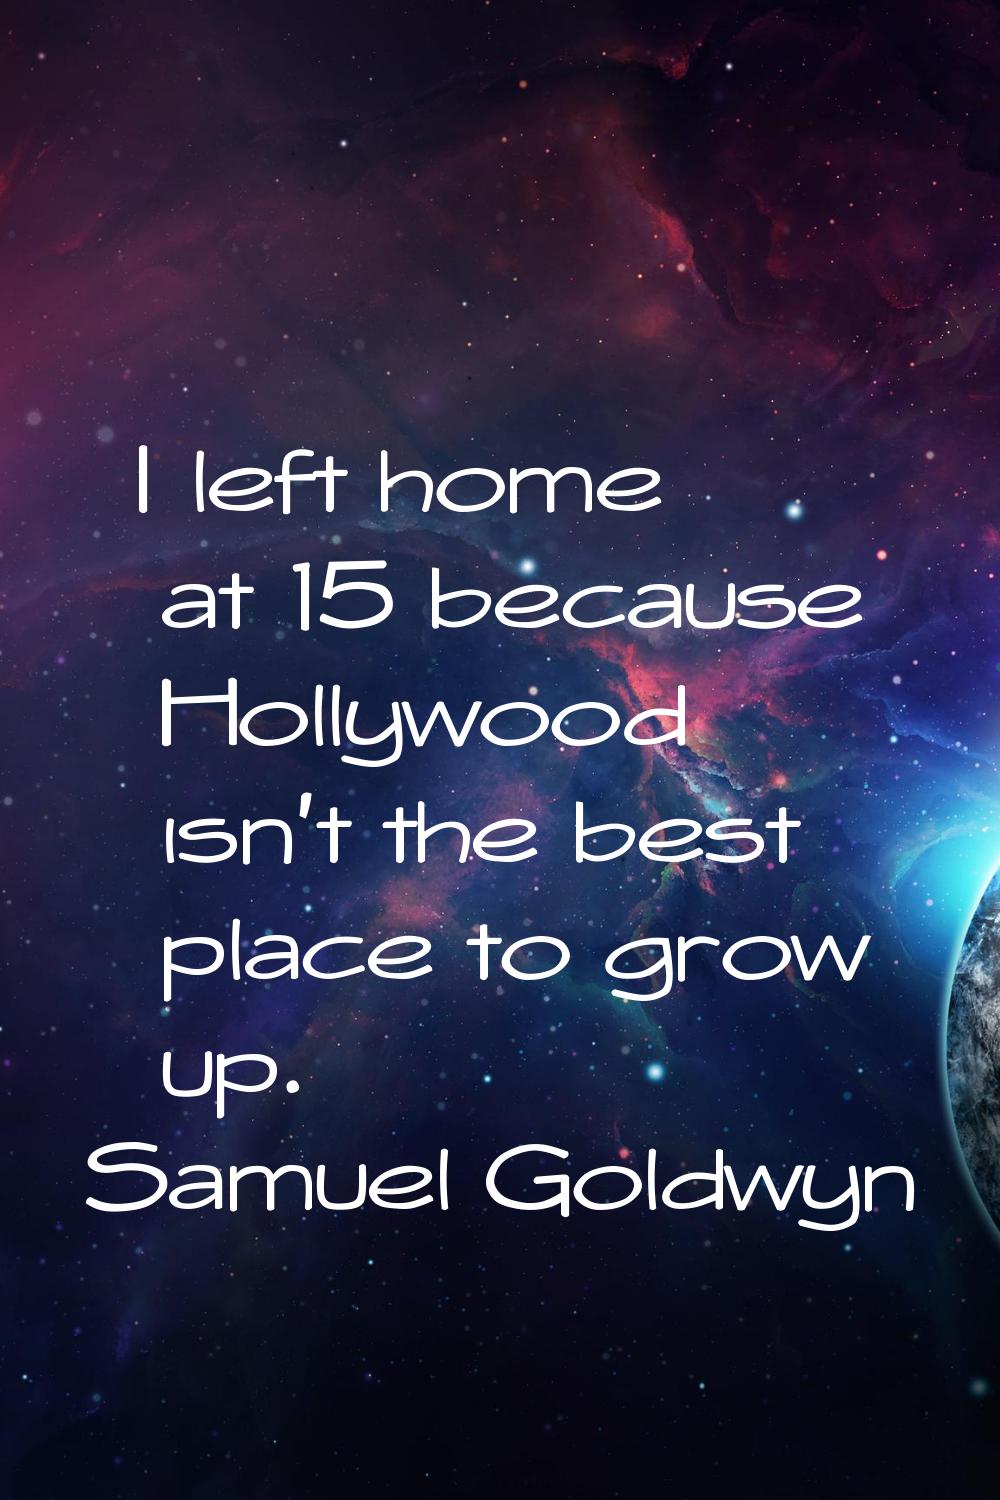 I left home at 15 because Hollywood isn't the best place to grow up.